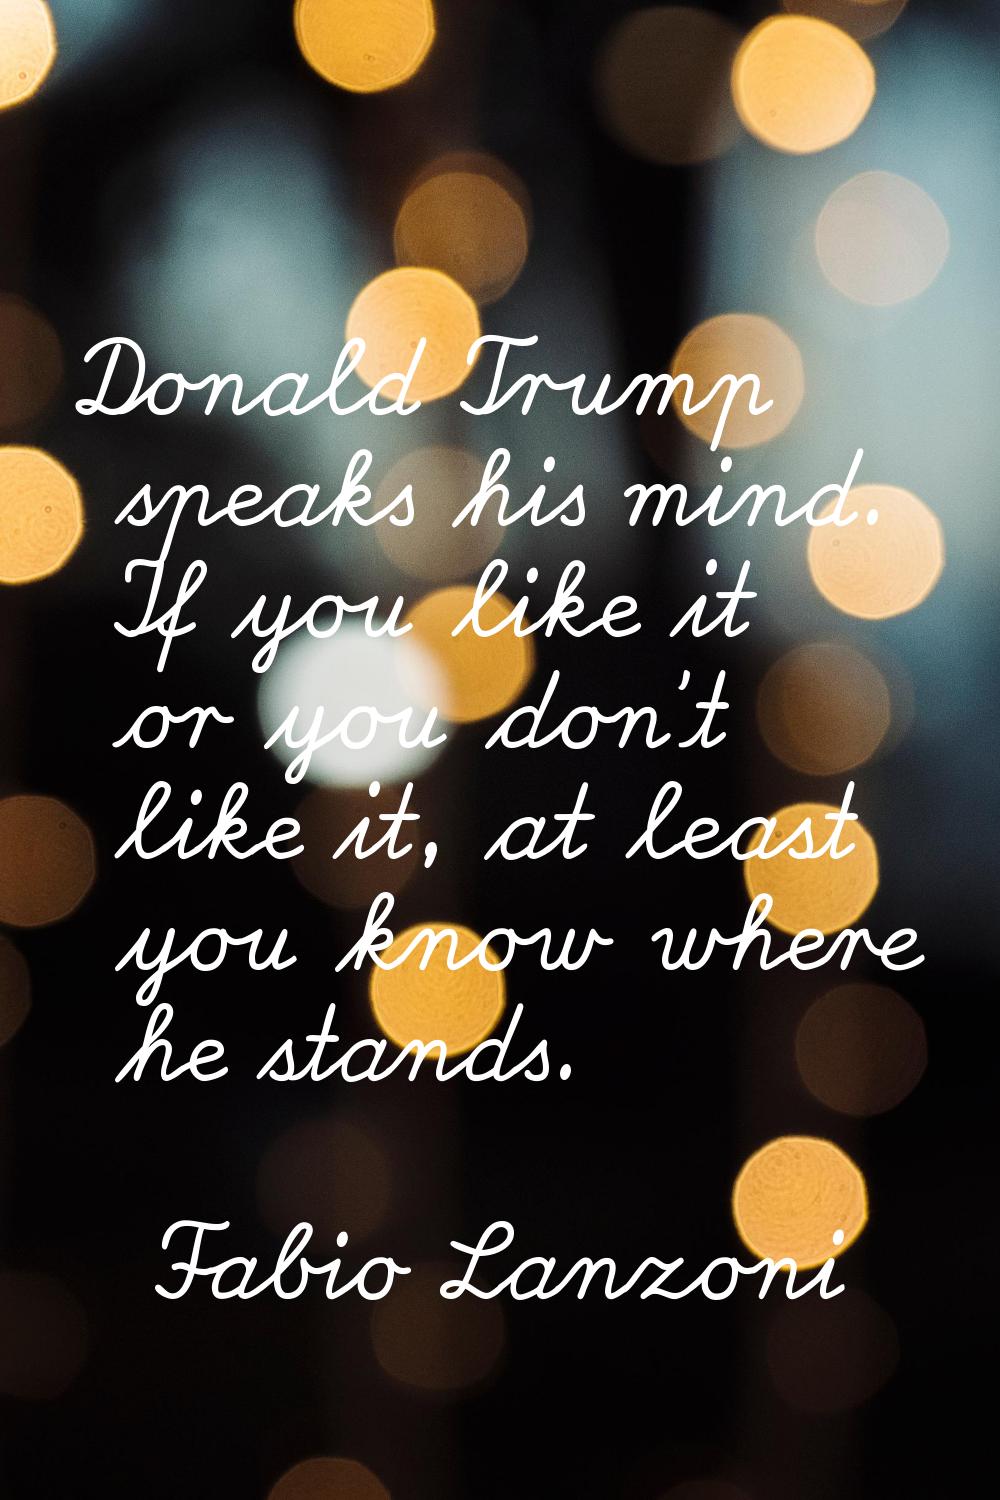 Donald Trump speaks his mind. If you like it or you don't like it, at least you know where he stand